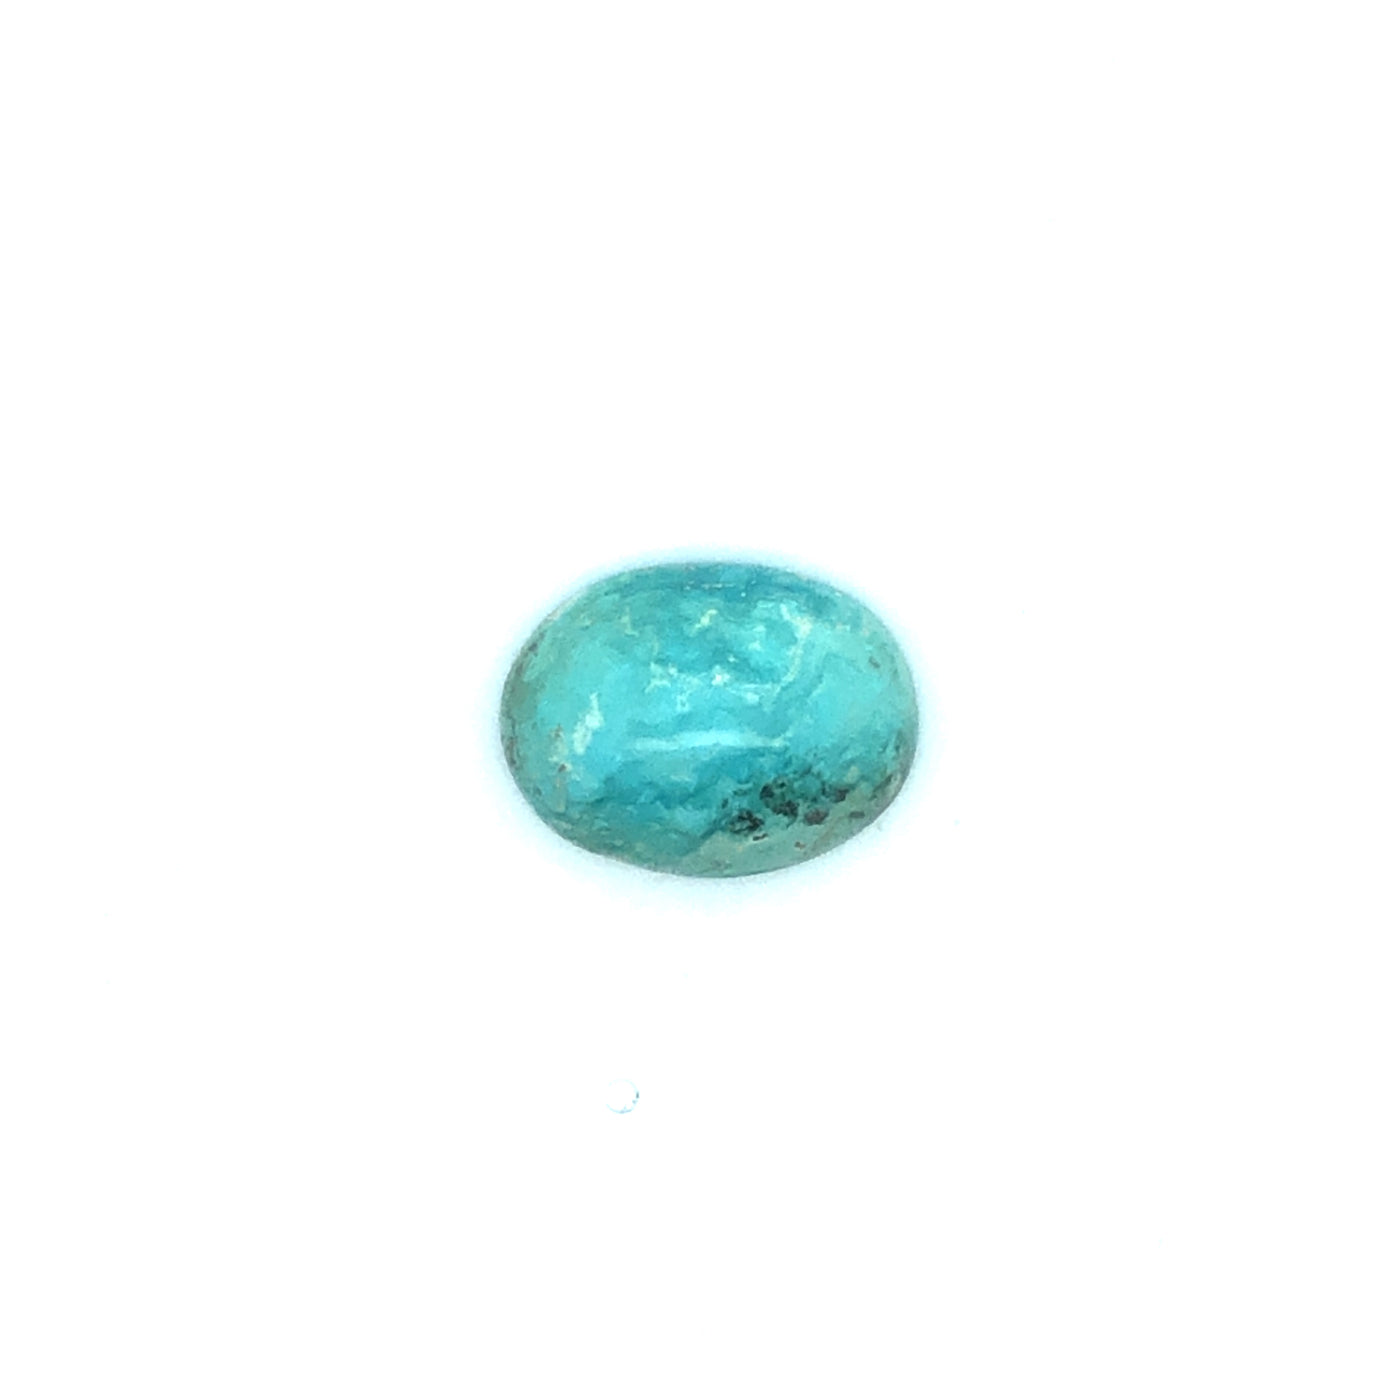 Loose Narooma Turquoise Oval Shaped 13.32Ct Blue